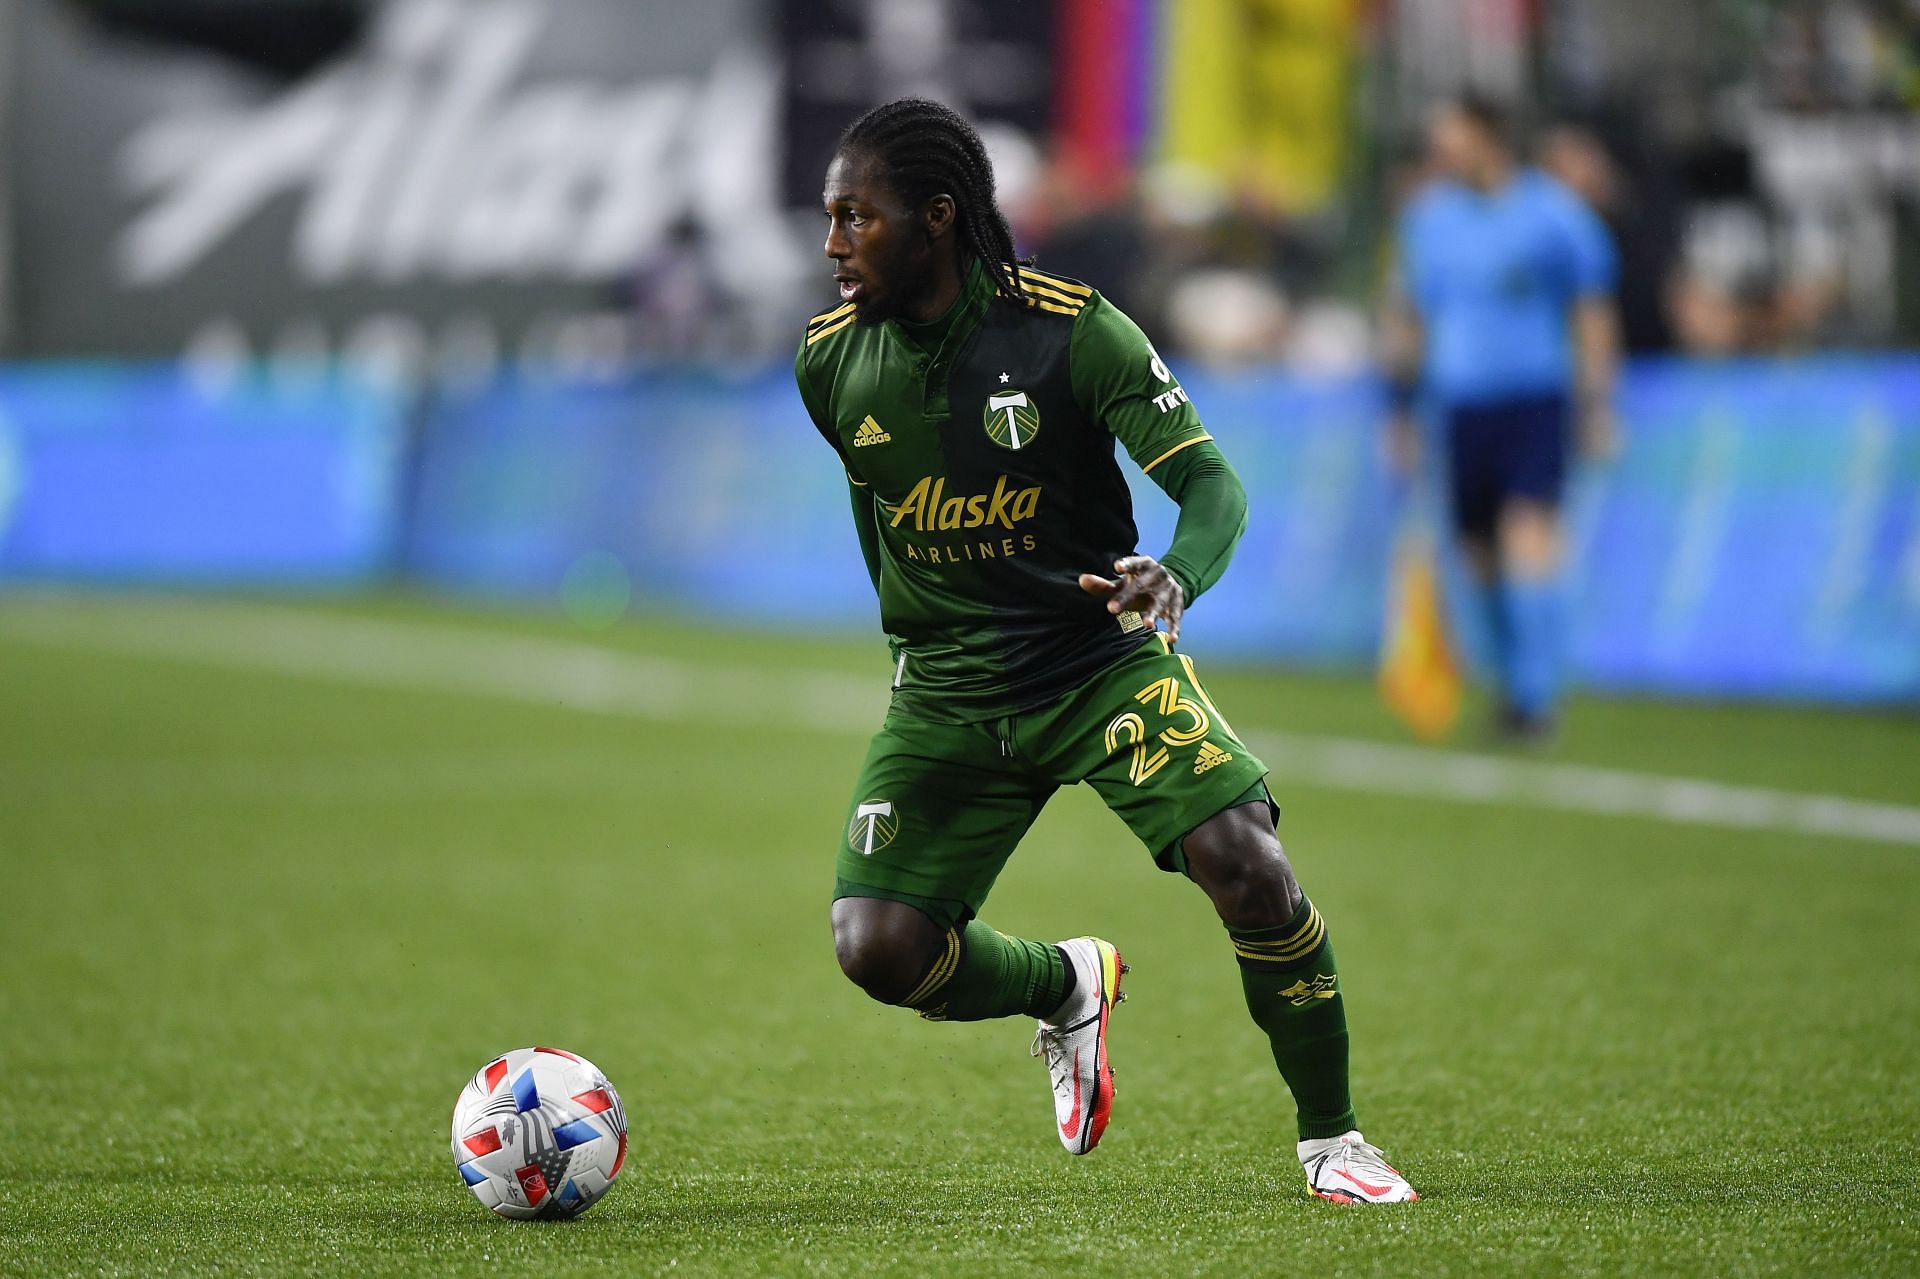 Portland Timbers host LA Galaxy in their upcoming MLS fixture on Sunday